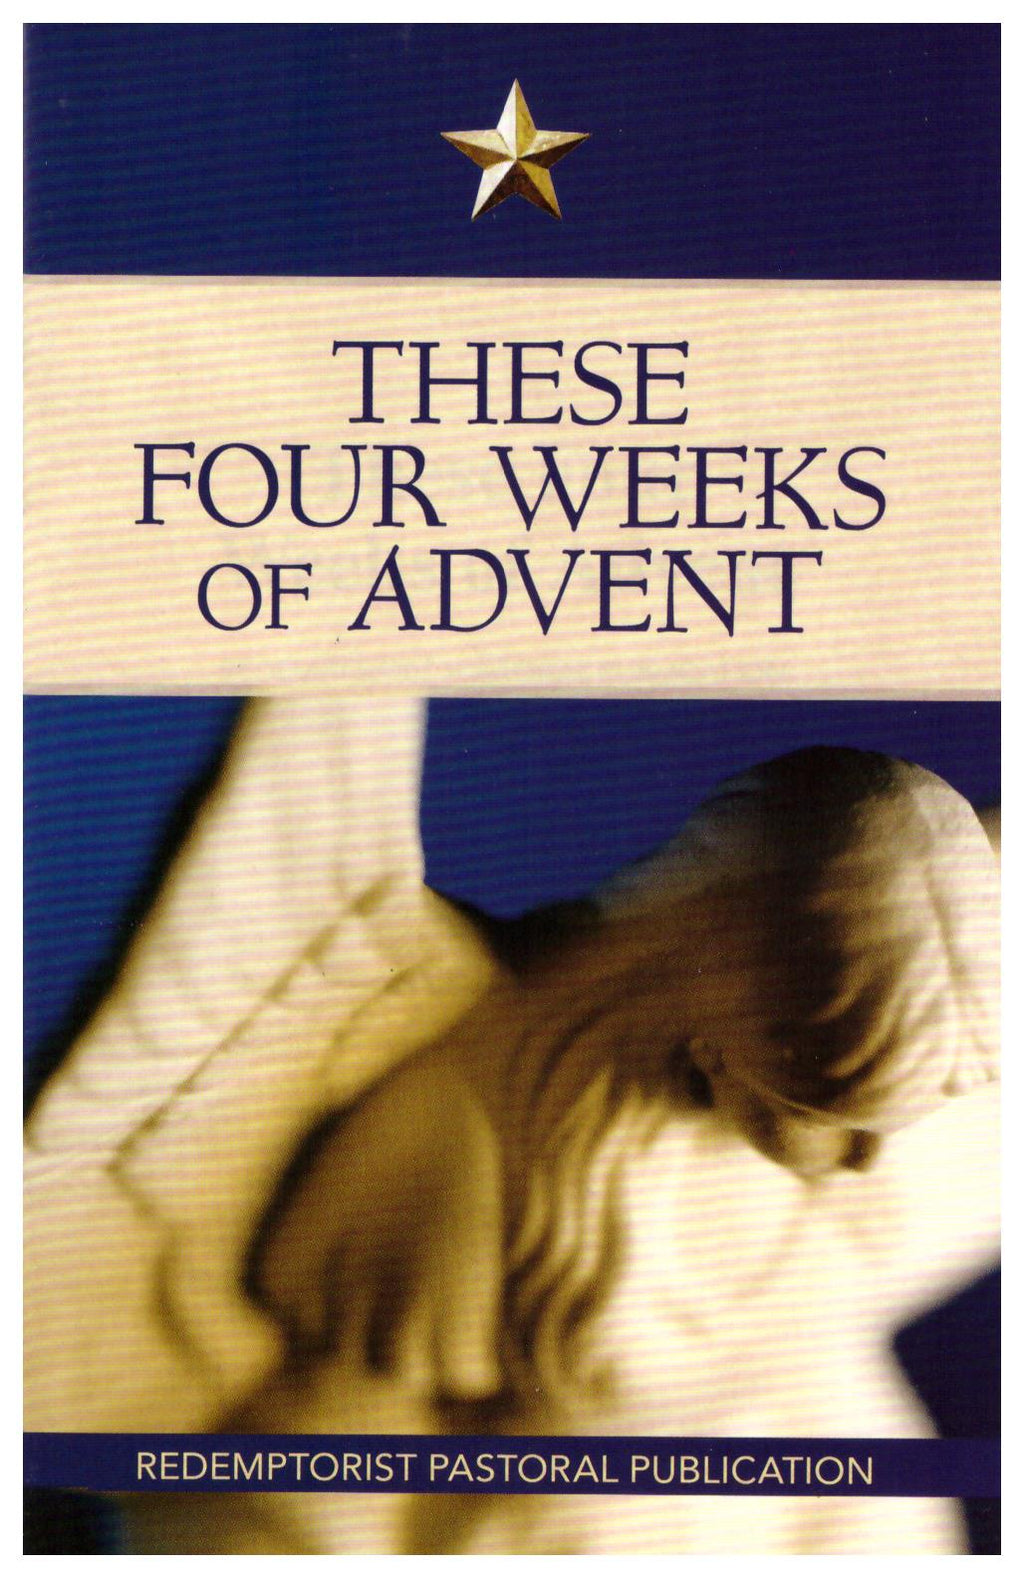 THESE FOUR WEEKS OF ADVENT